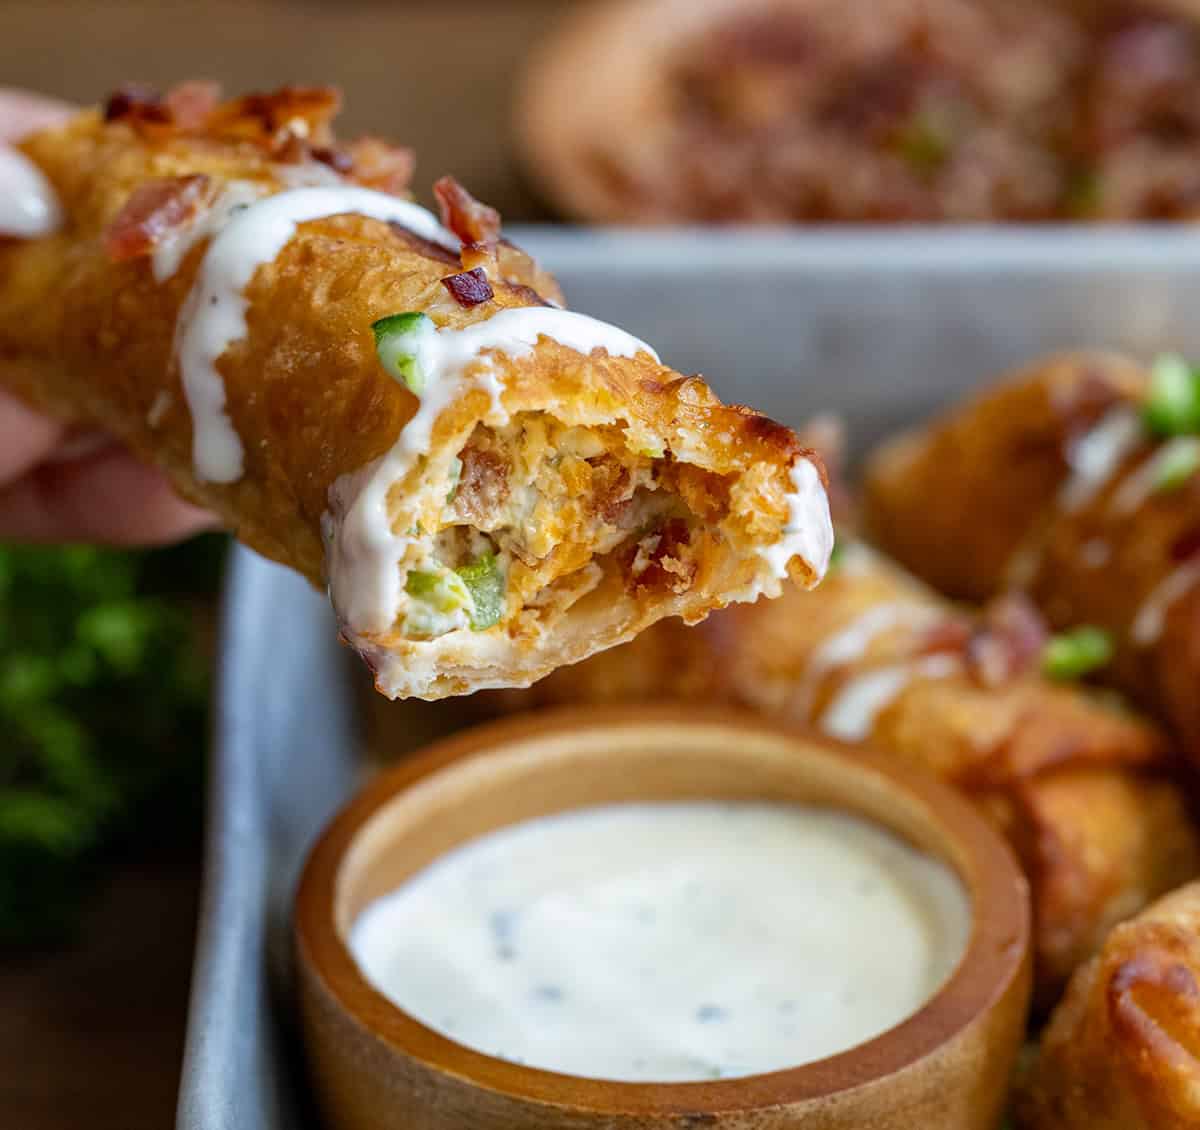 A bit into Jalapeno Popper Egg Roll that has been dipped into ranch and shows the creamy filling.